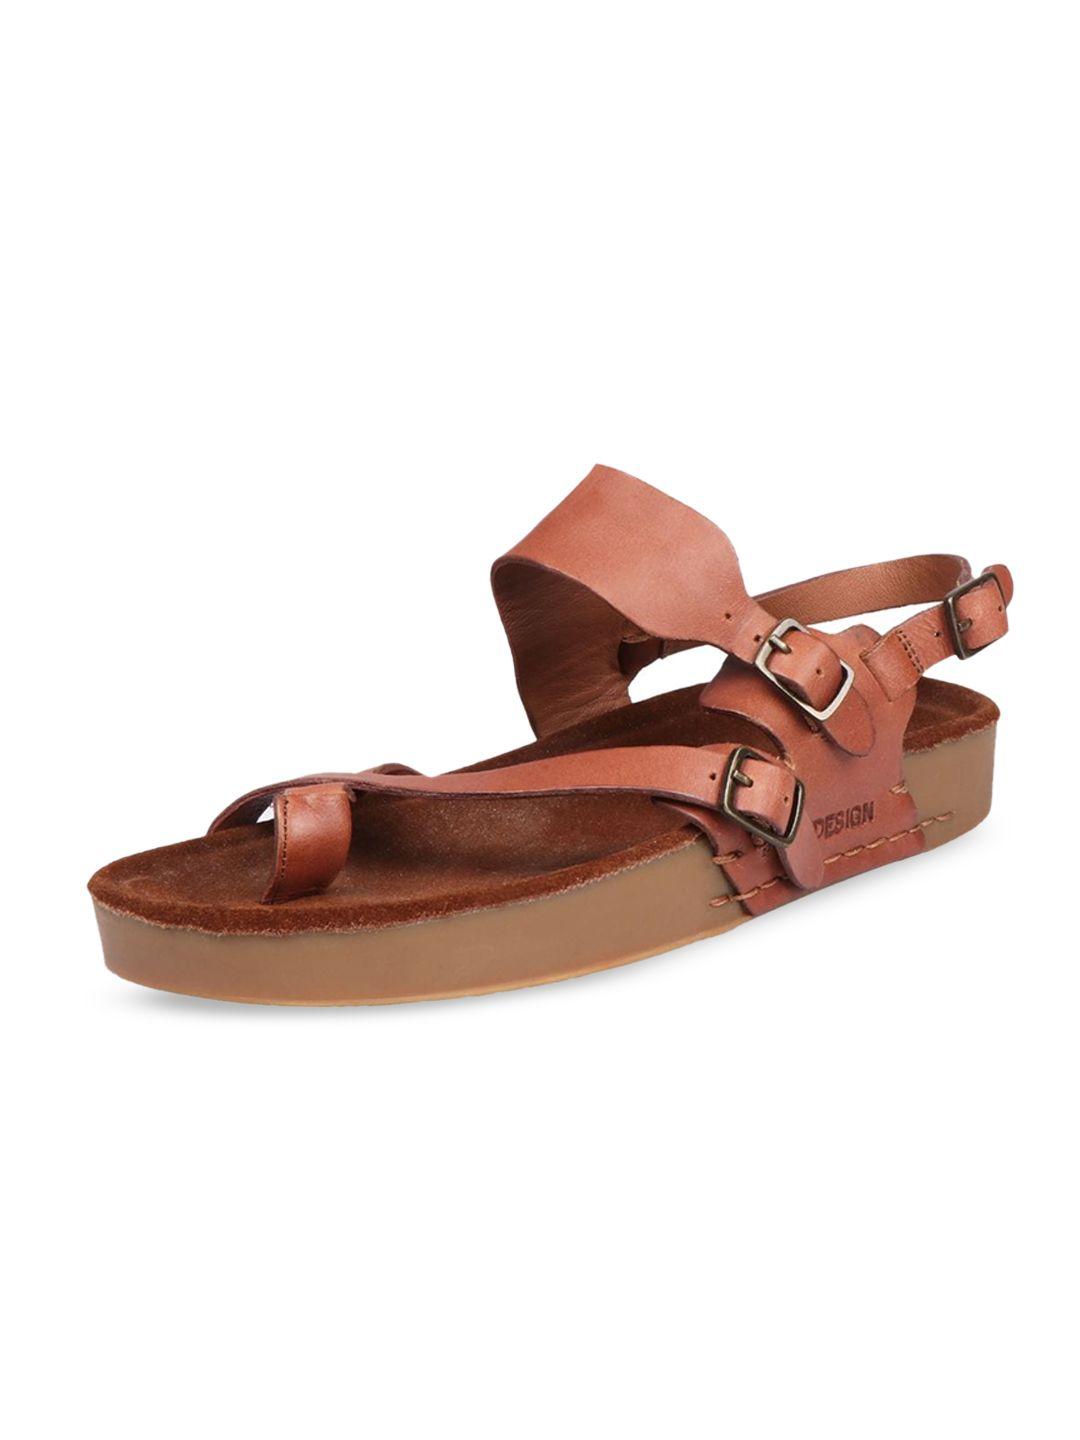 hidesign port blair leather one toe flats with buckle closure